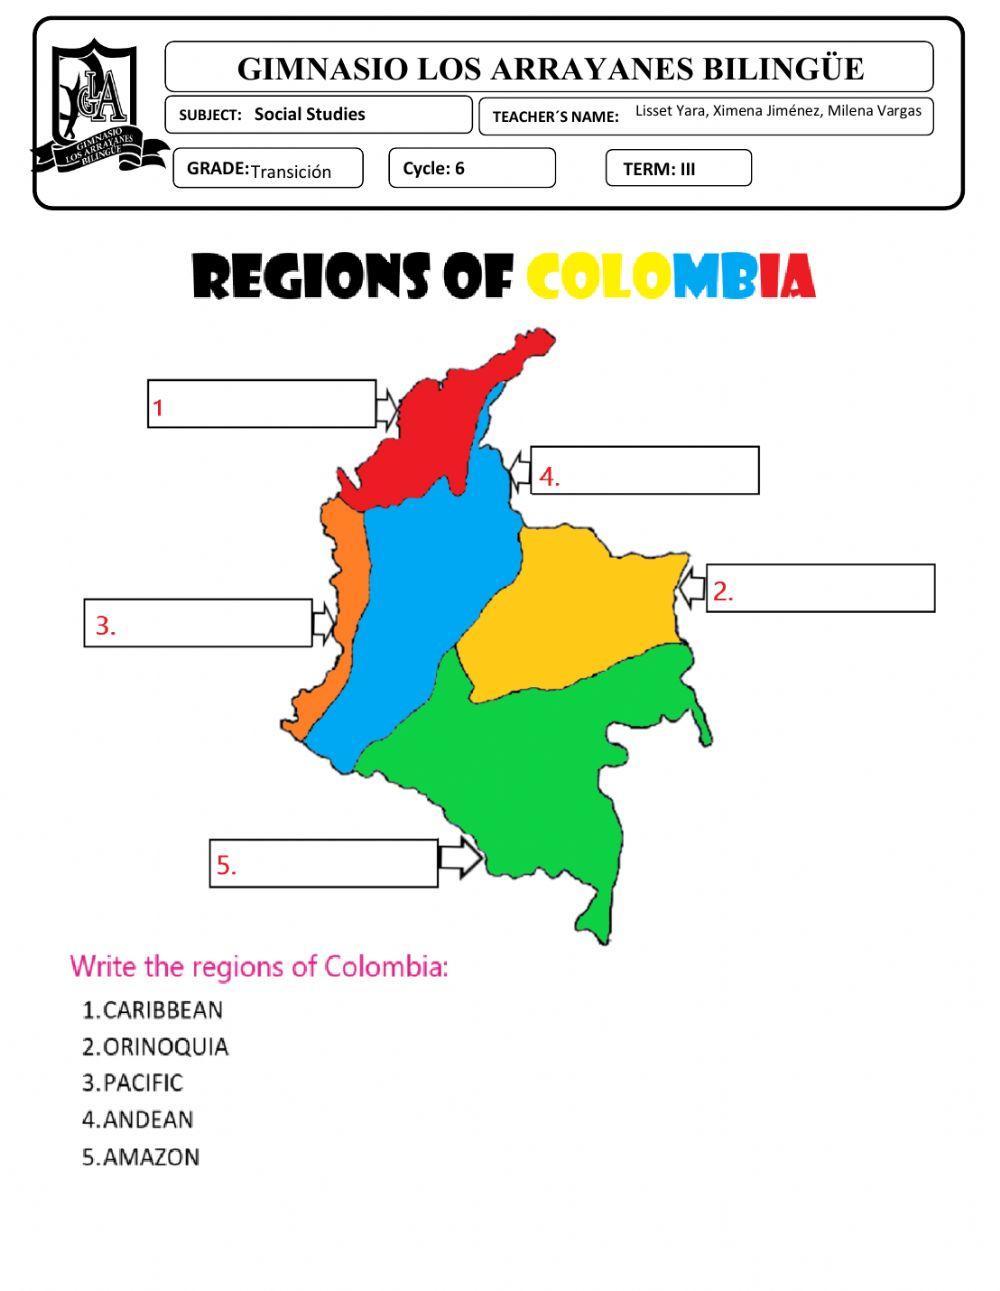 Colombian Folklore